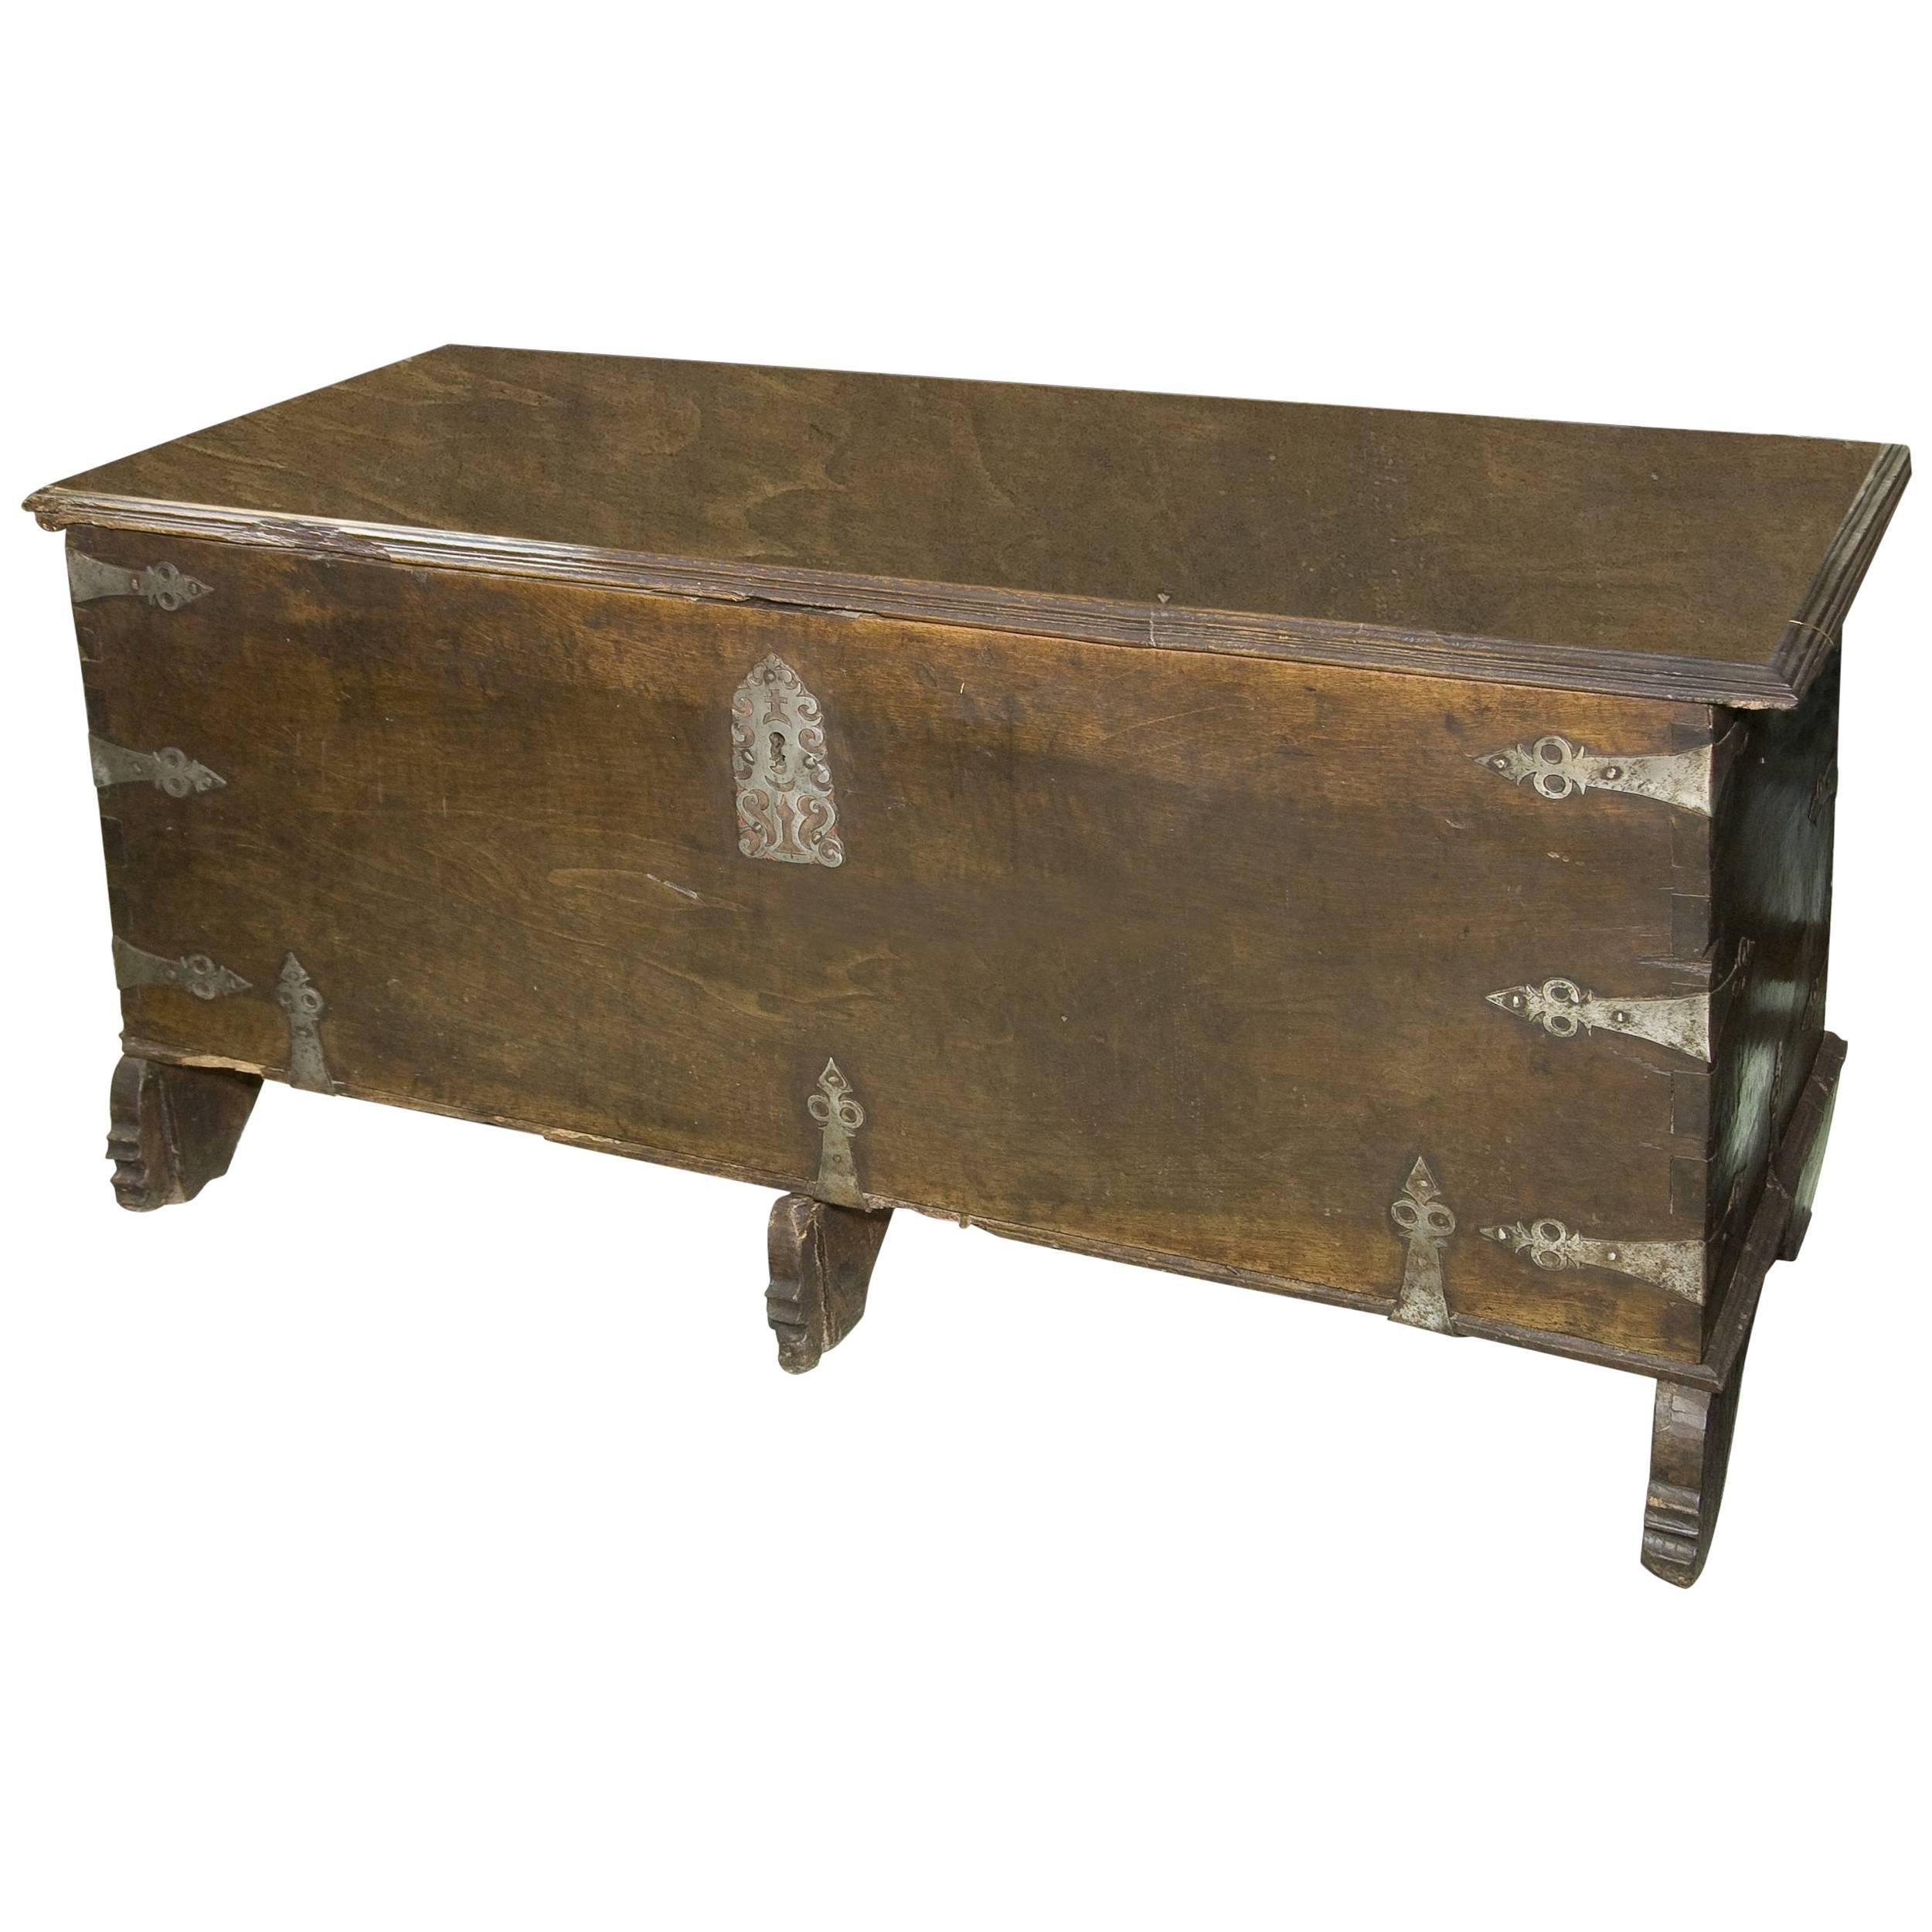 Walnut Chest with Wrought Iron Fittings, Baroque, 17th Century